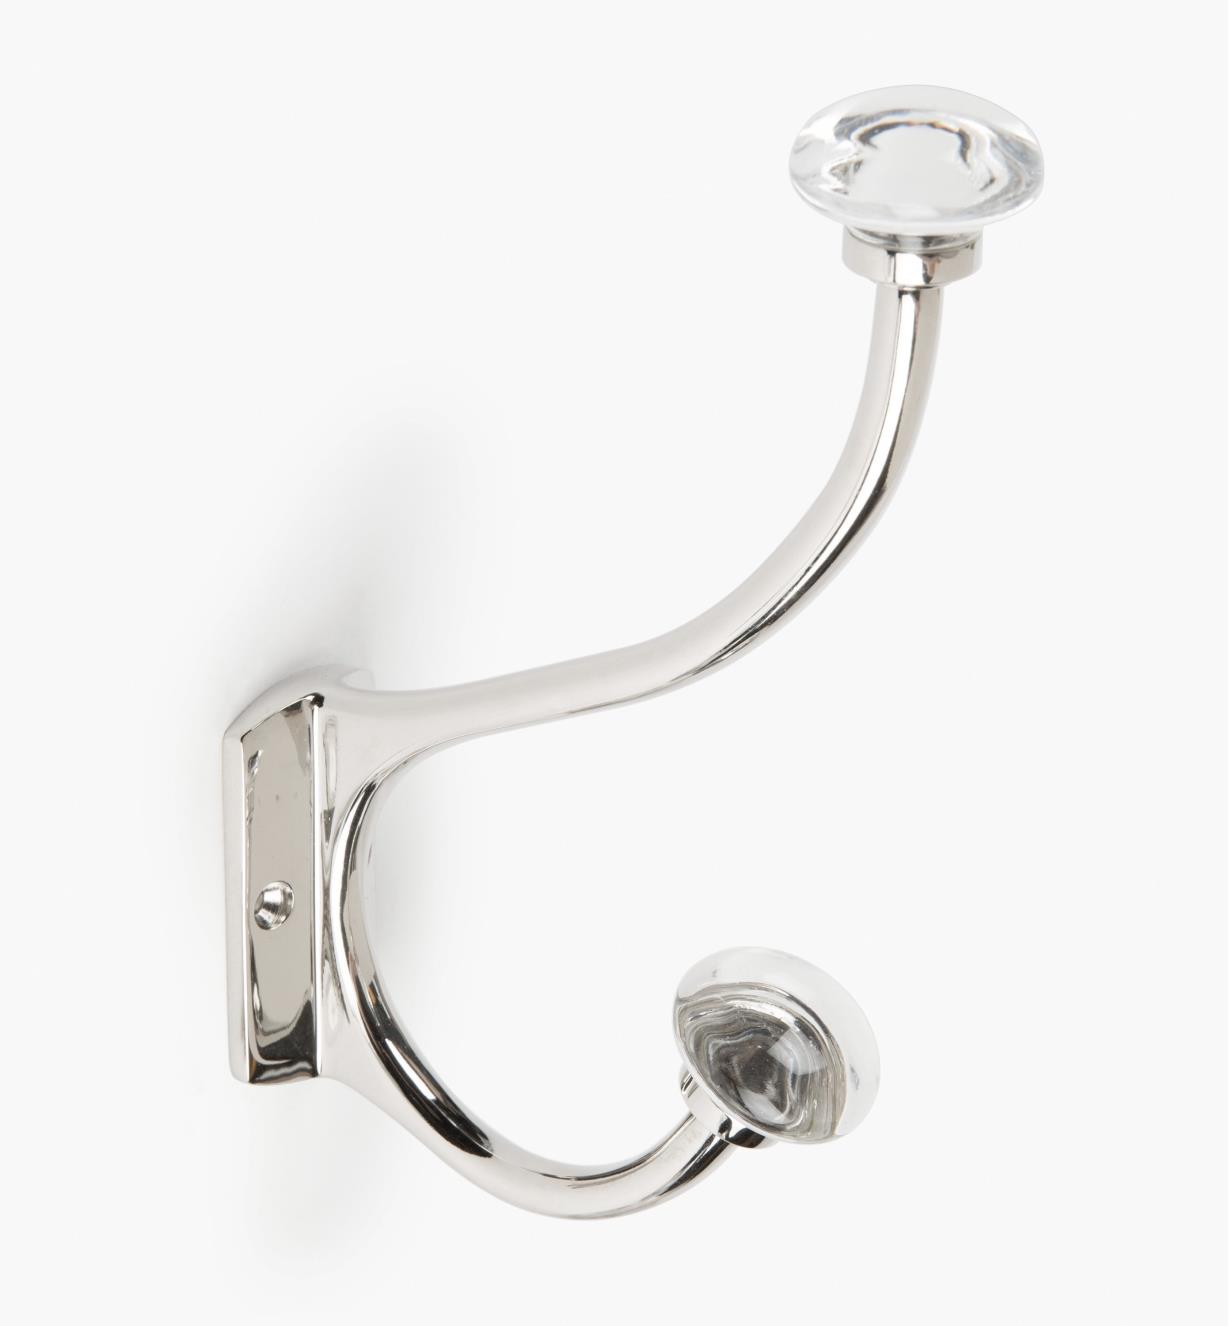 00W8553 - Polished Nickel Coat Hook with Plain Crystal Knobs